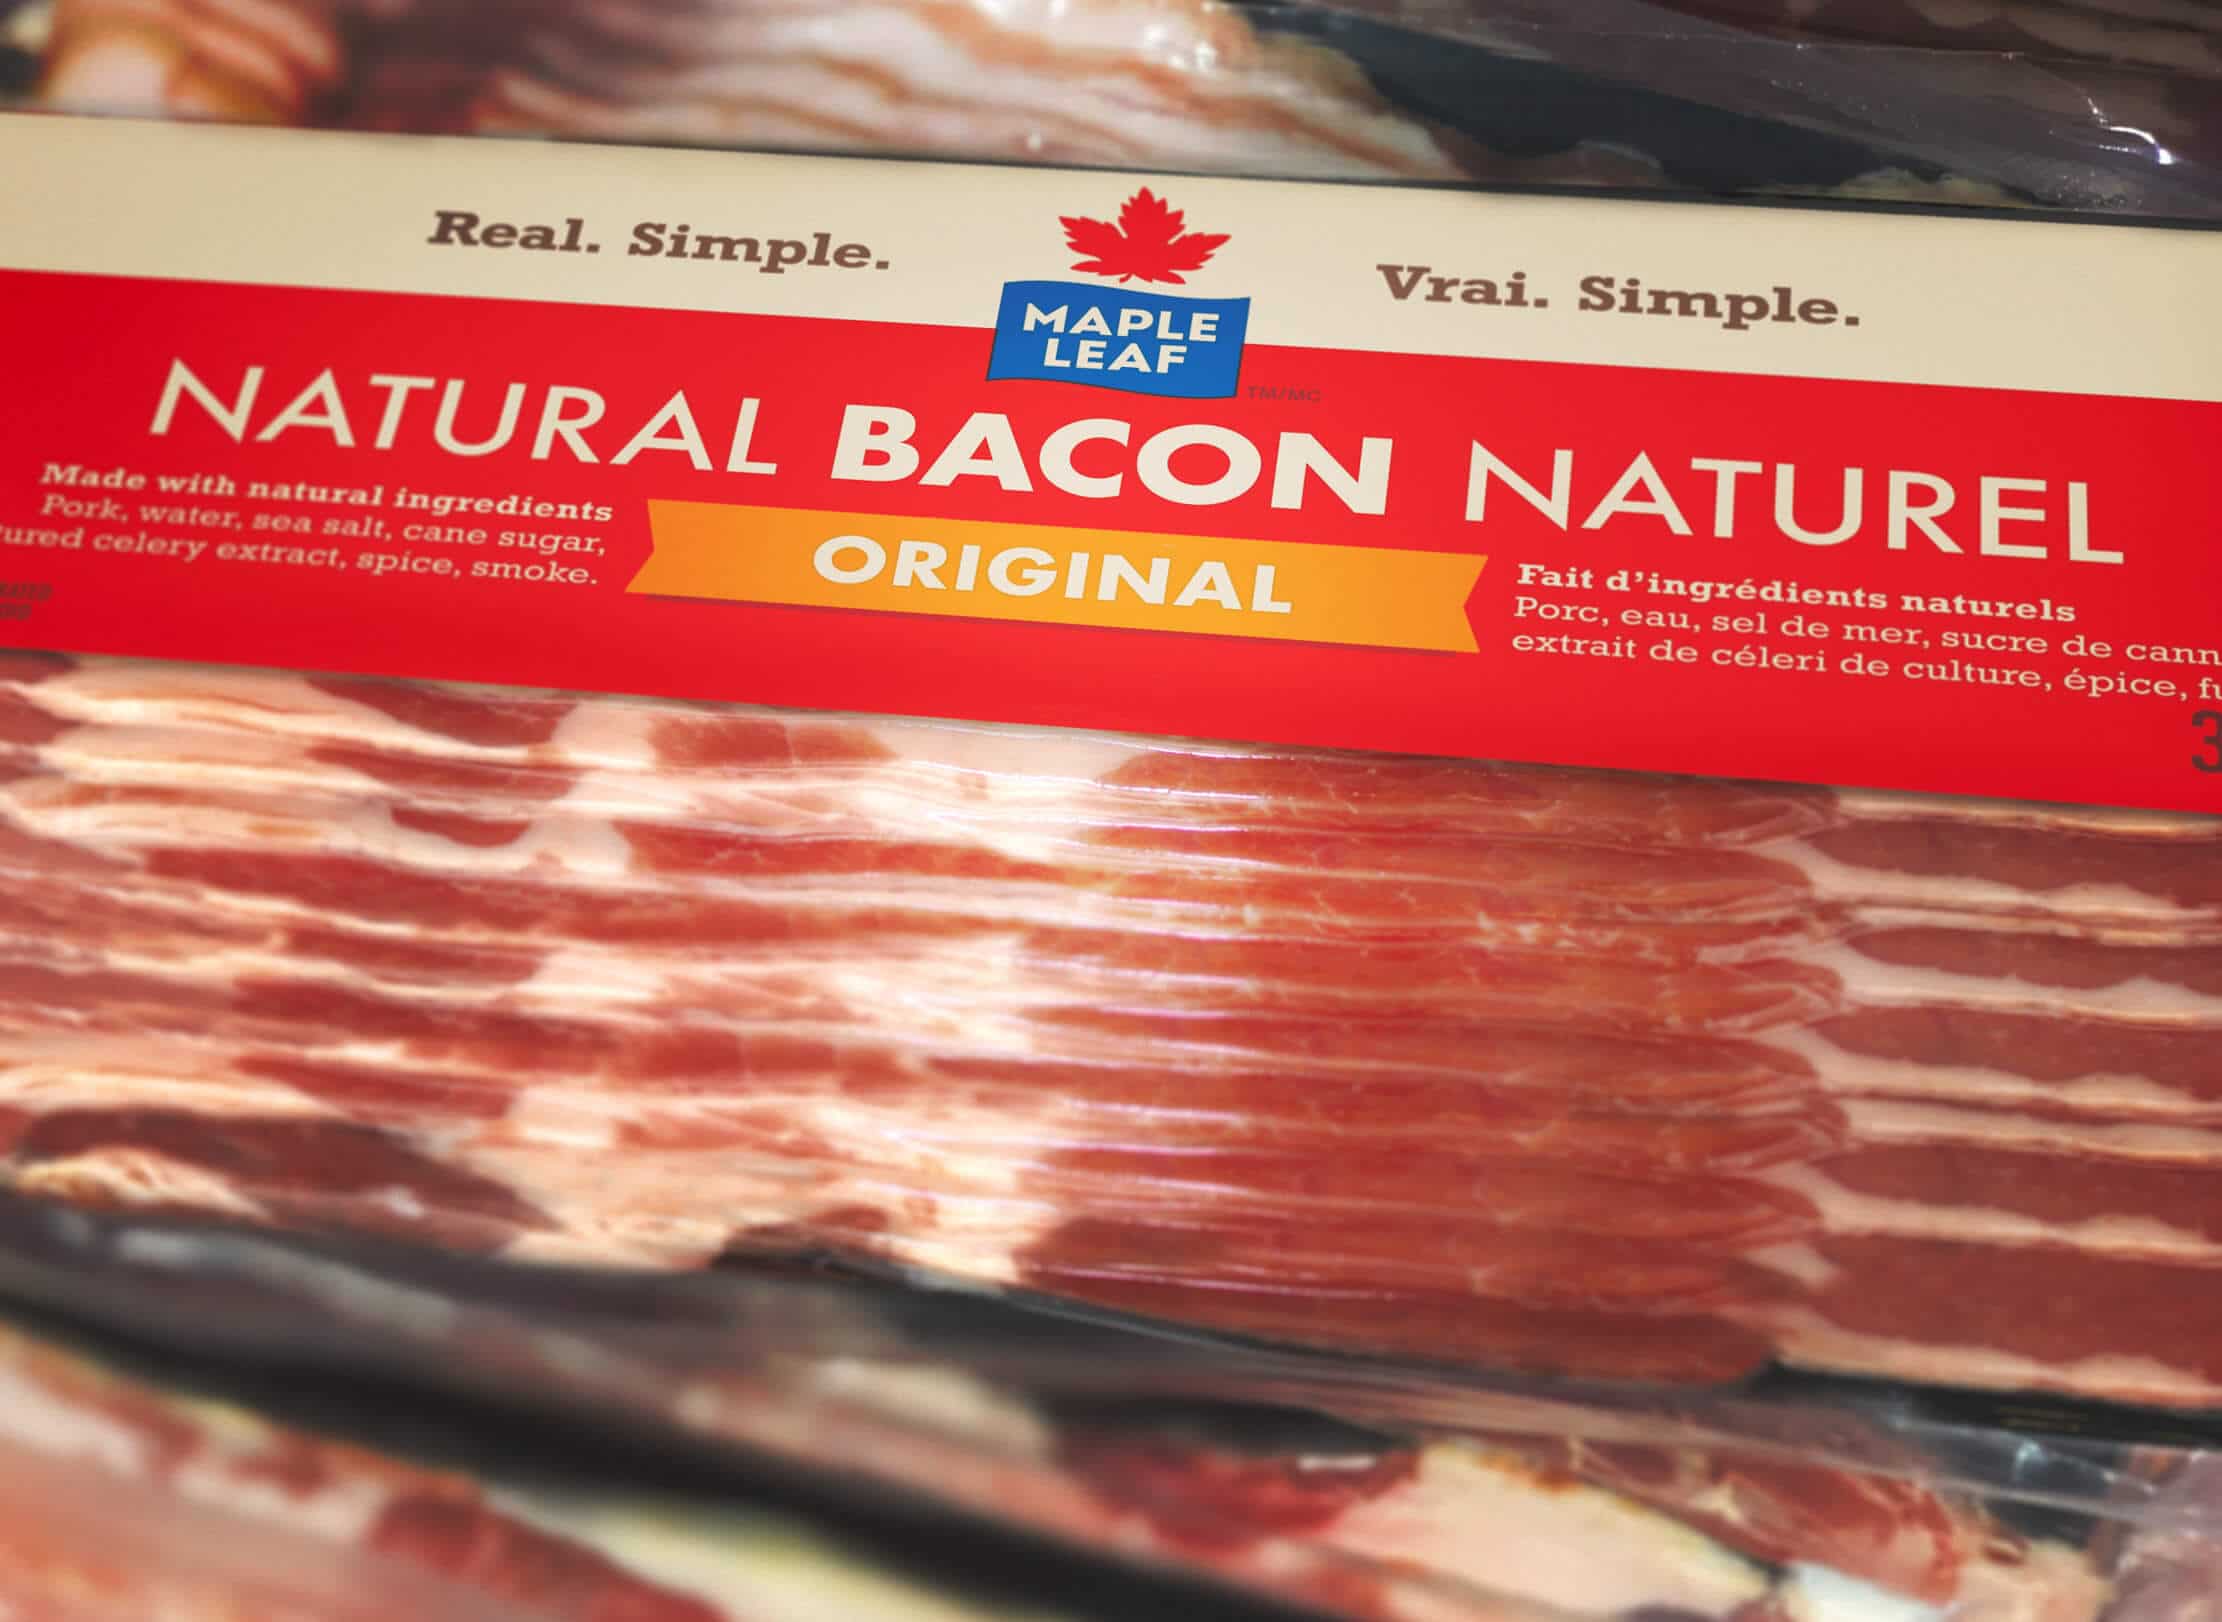 Package of Maple Leaf Natural Bacon.